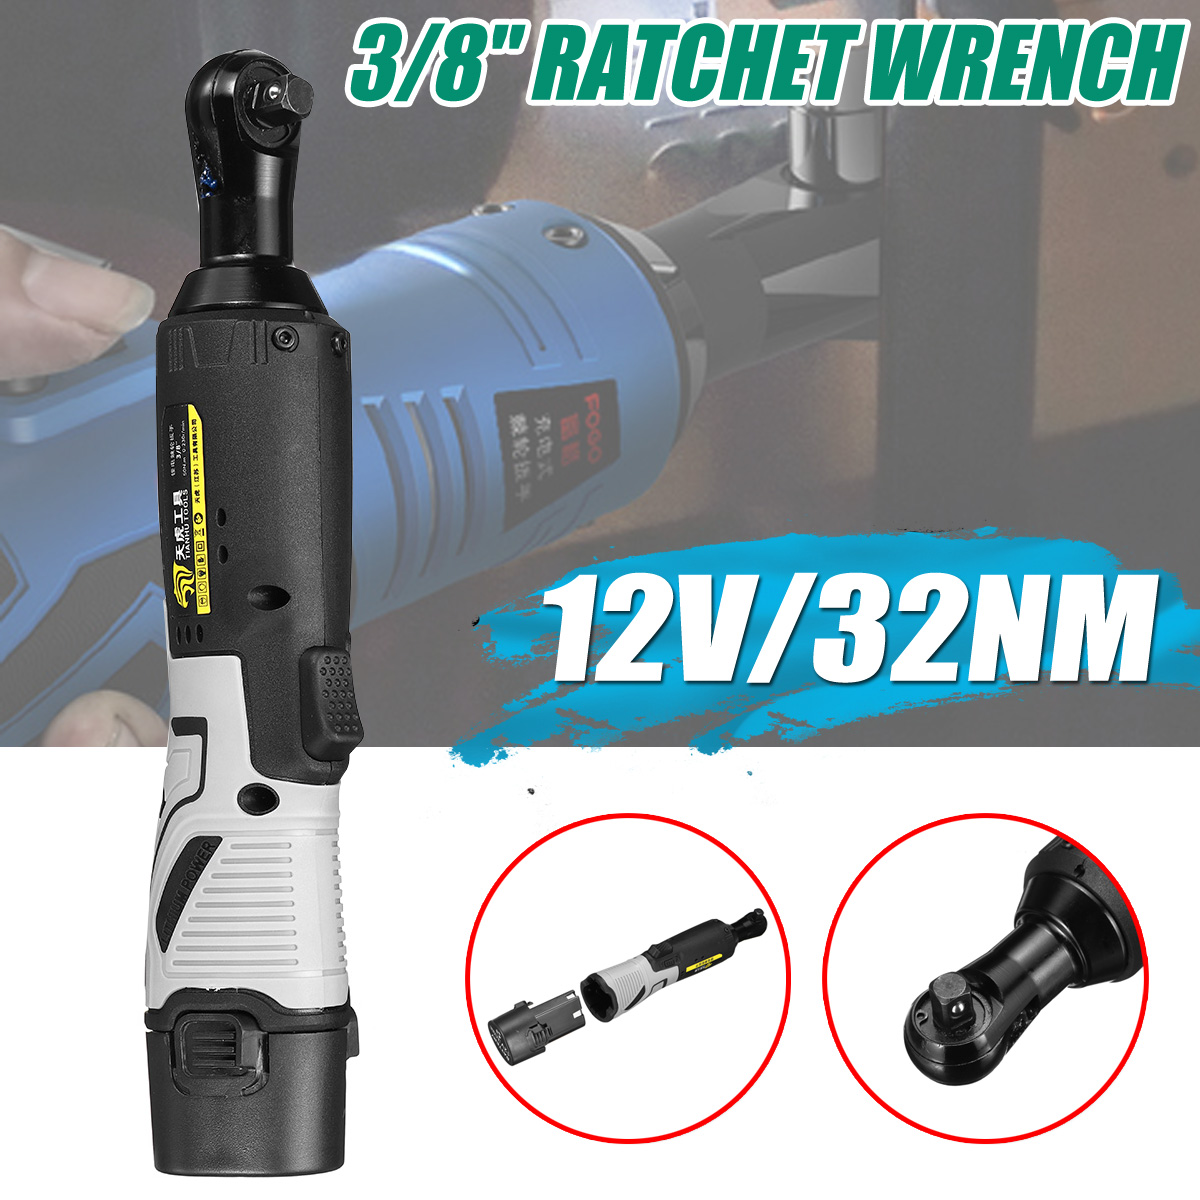 12V-38quot-Cordless-Electric-Ratchet-Wrench-Tool-Set-with-Battery--Charger-Kit-32NM-1300m-1579975-2